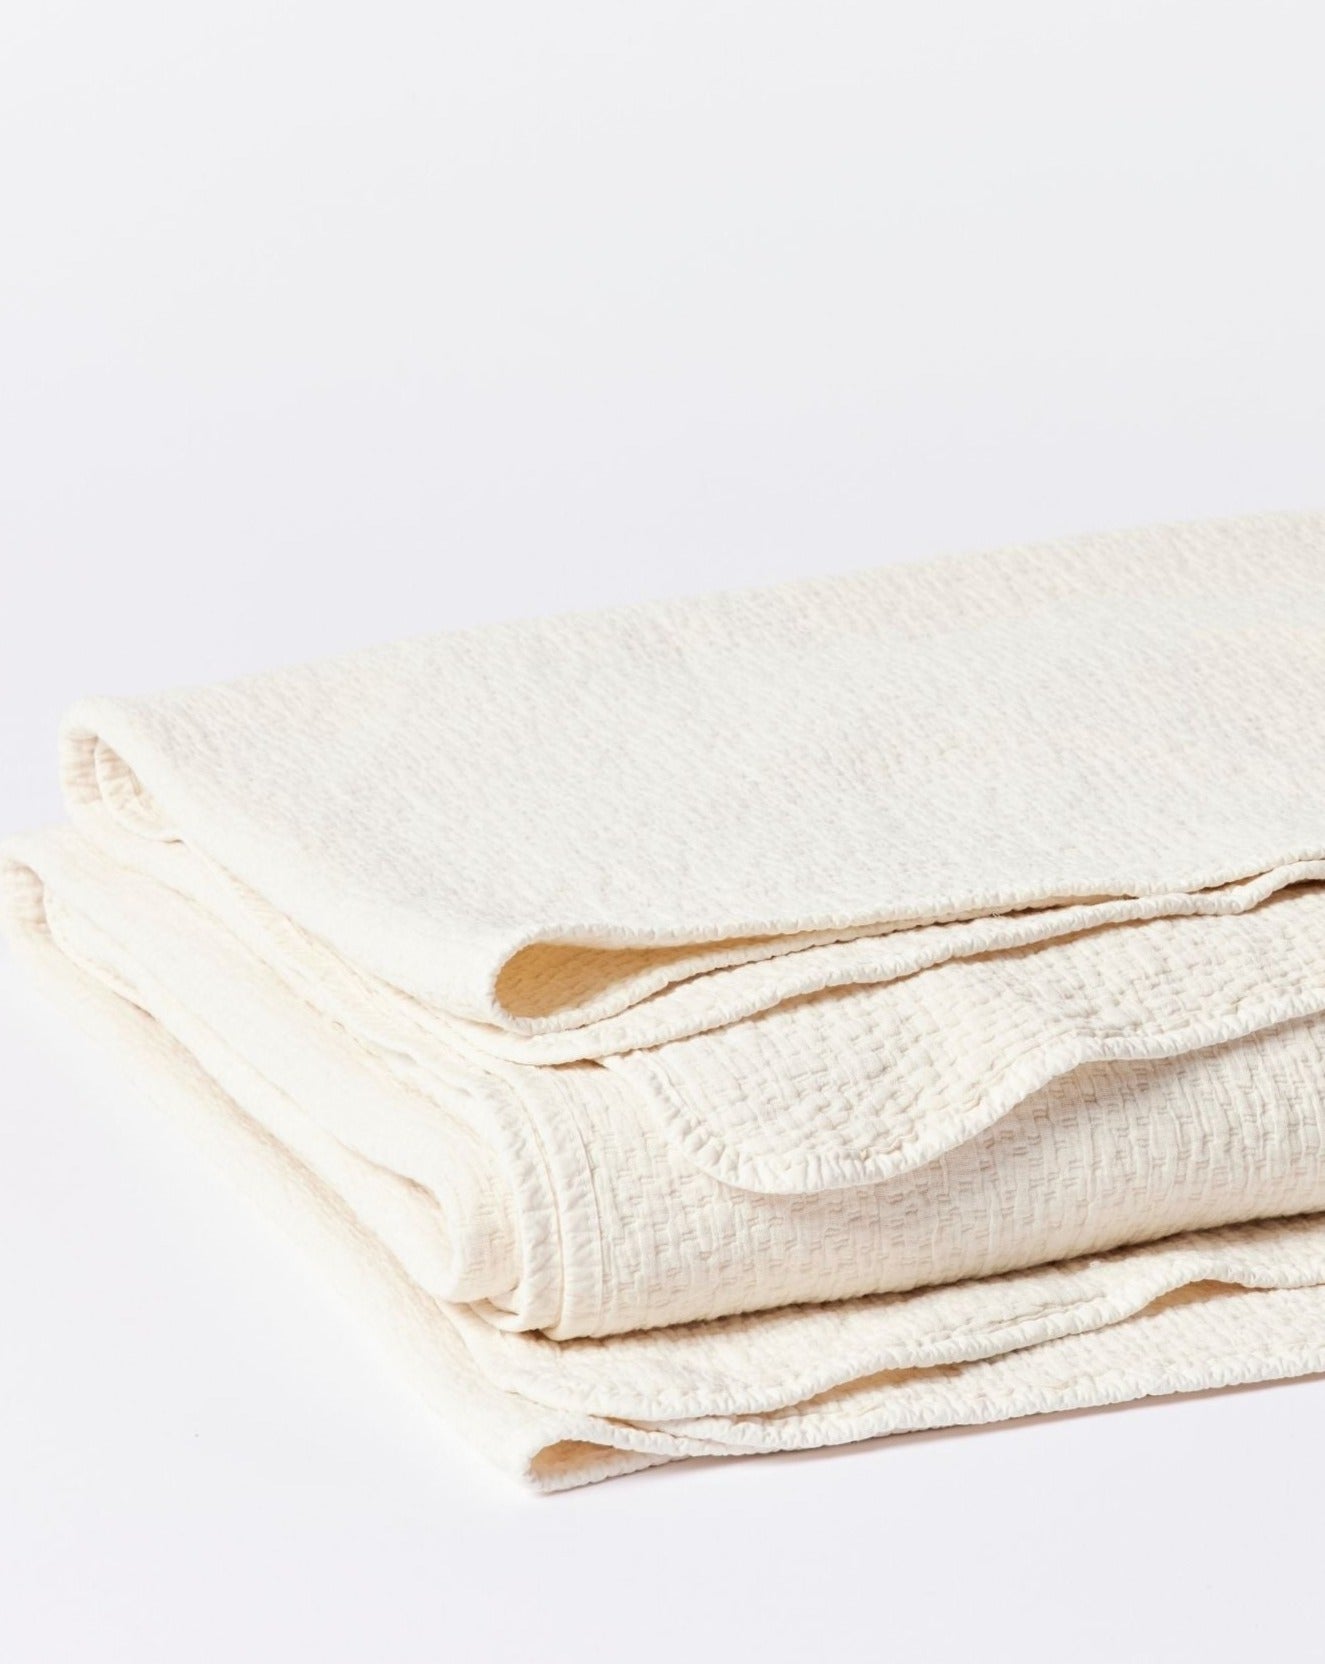 Organic Matelasse blanket available in Canada